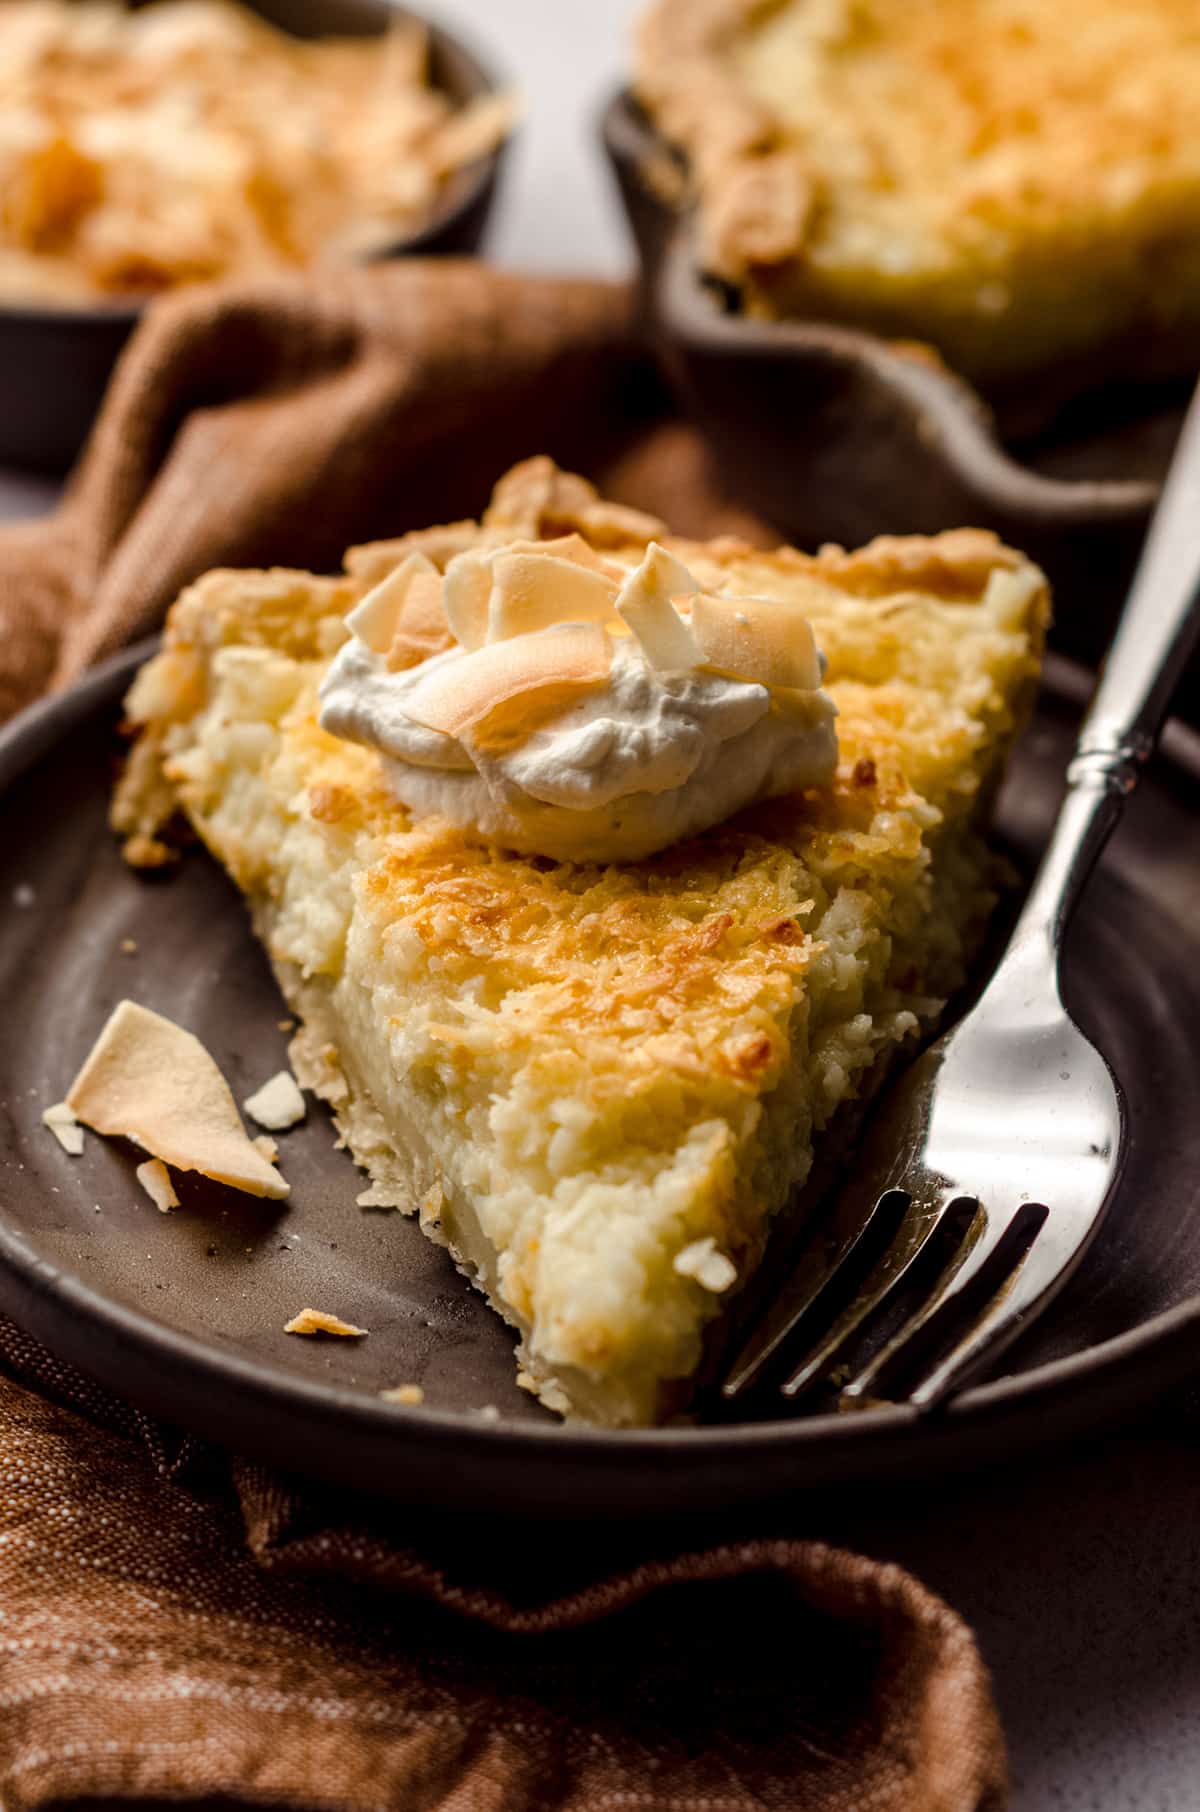 A slice of custard pie, topped with shredded coconut and a dollop of whipped cream.